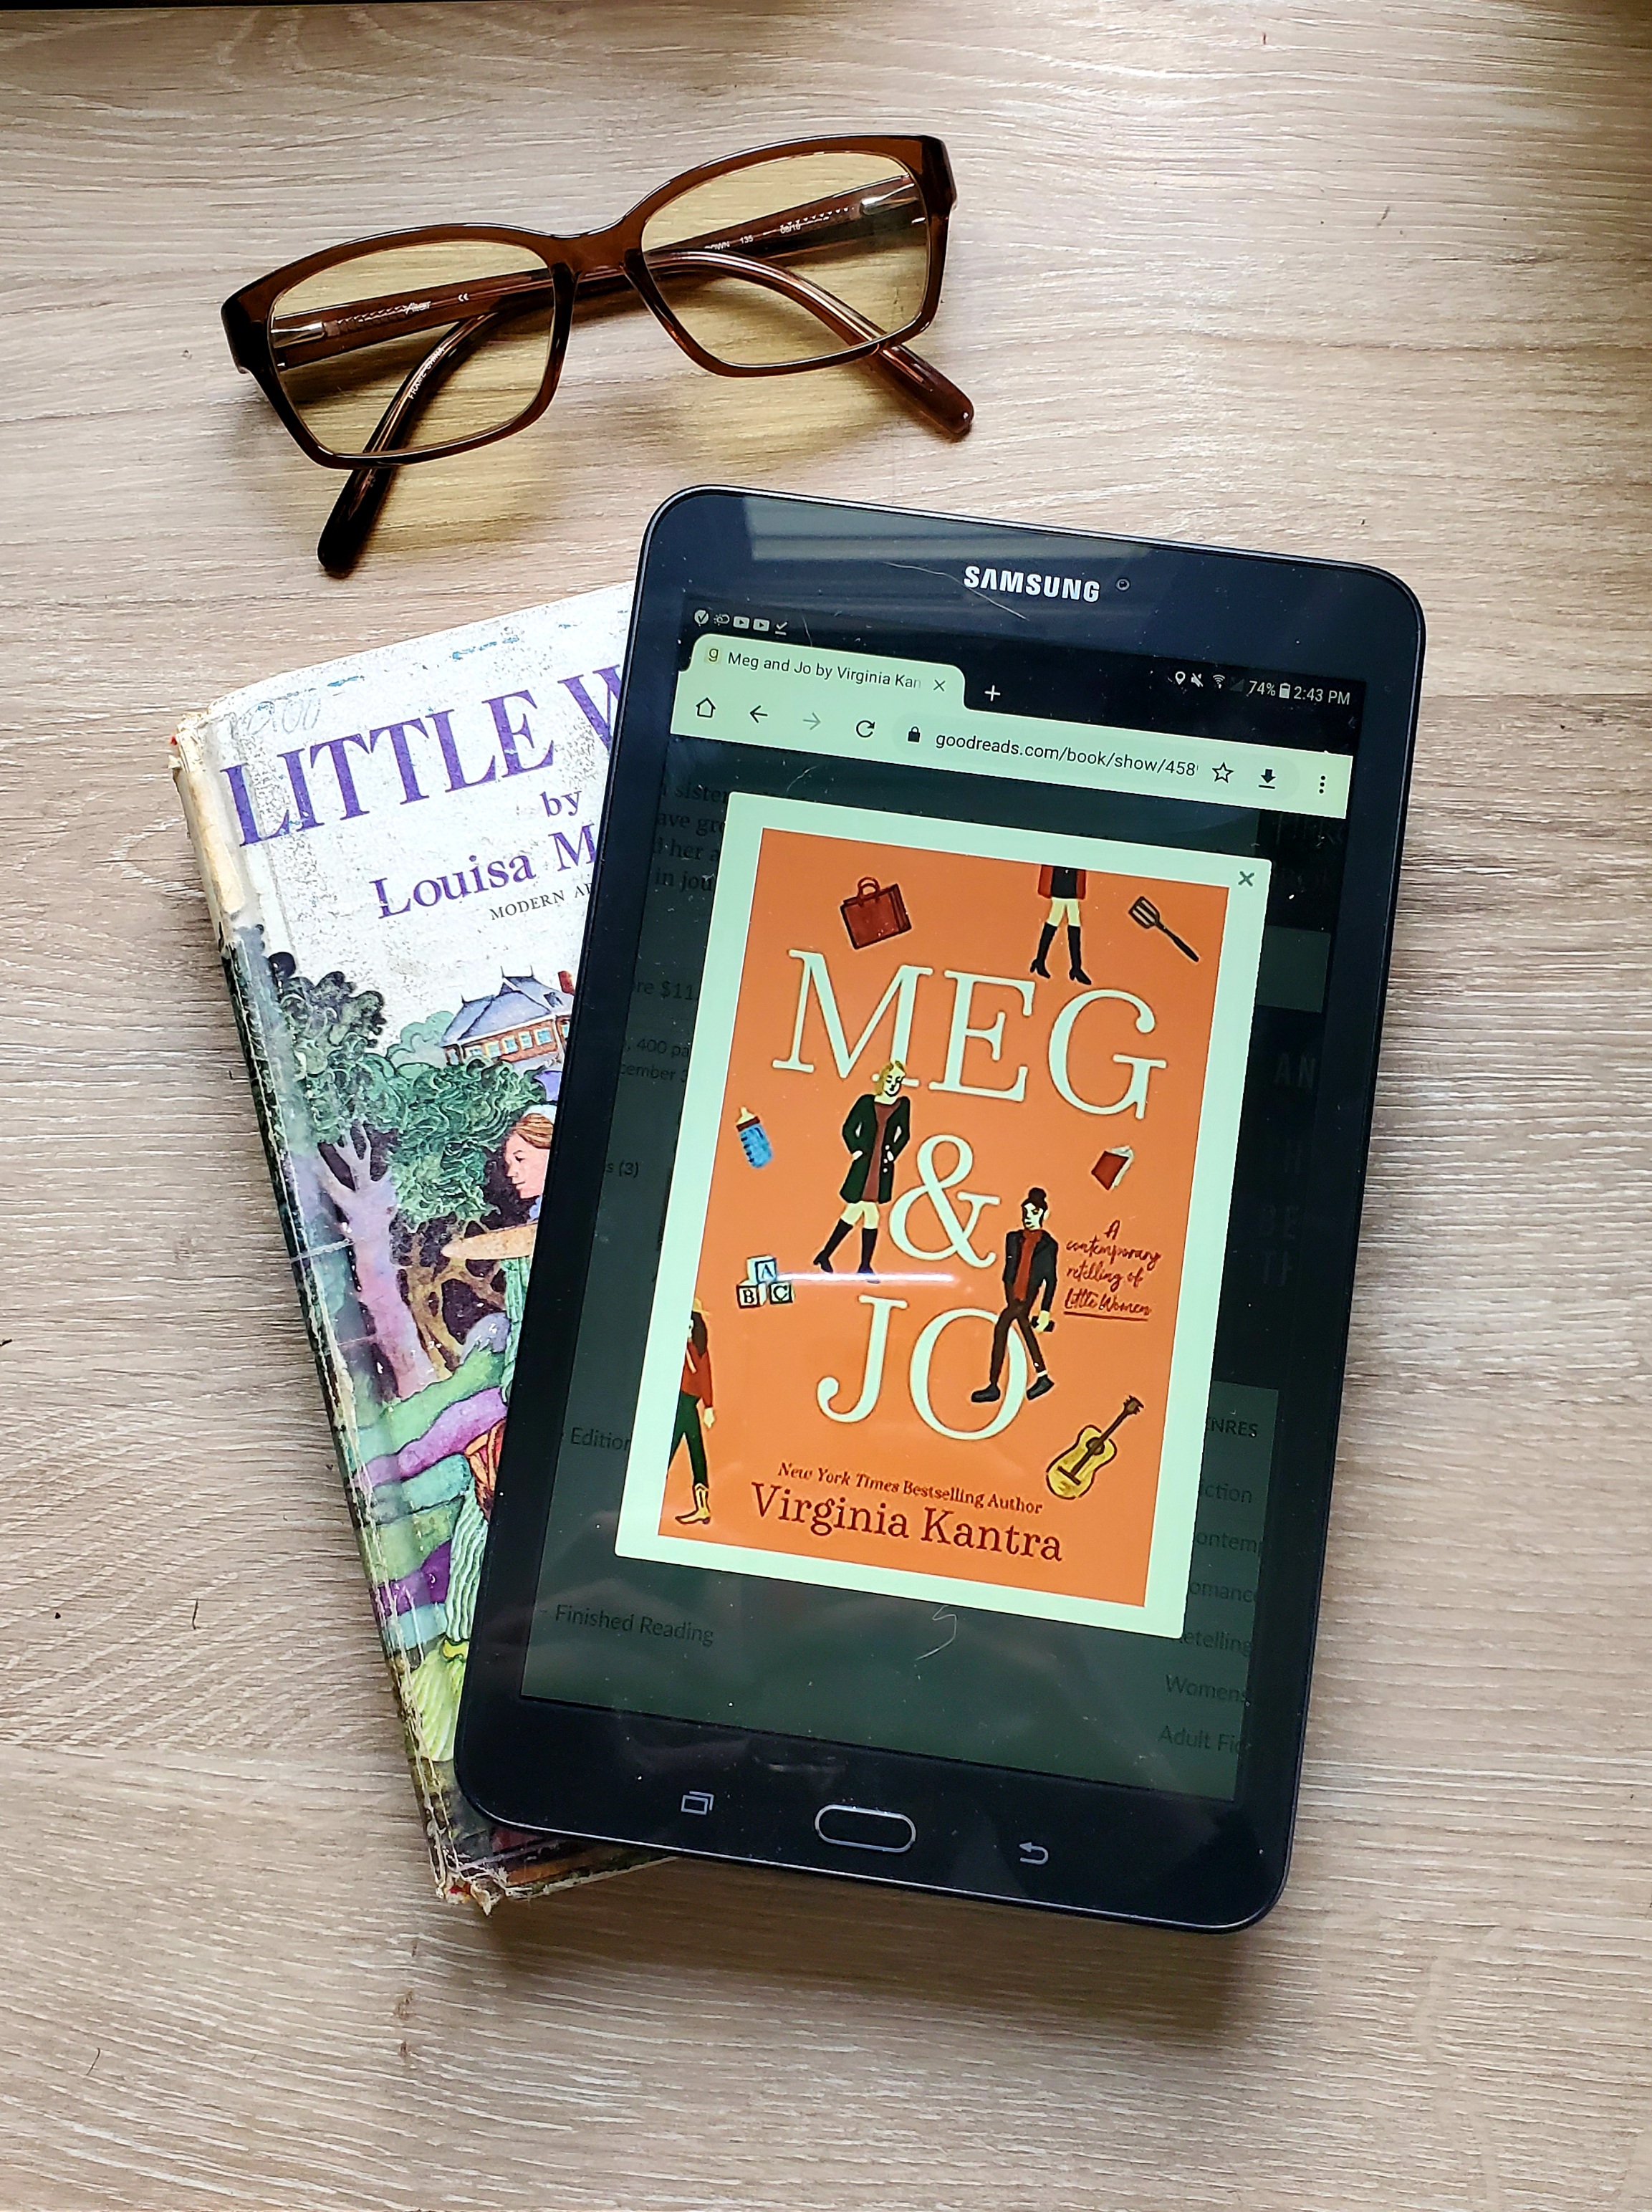 Book cover of Meg and Jo